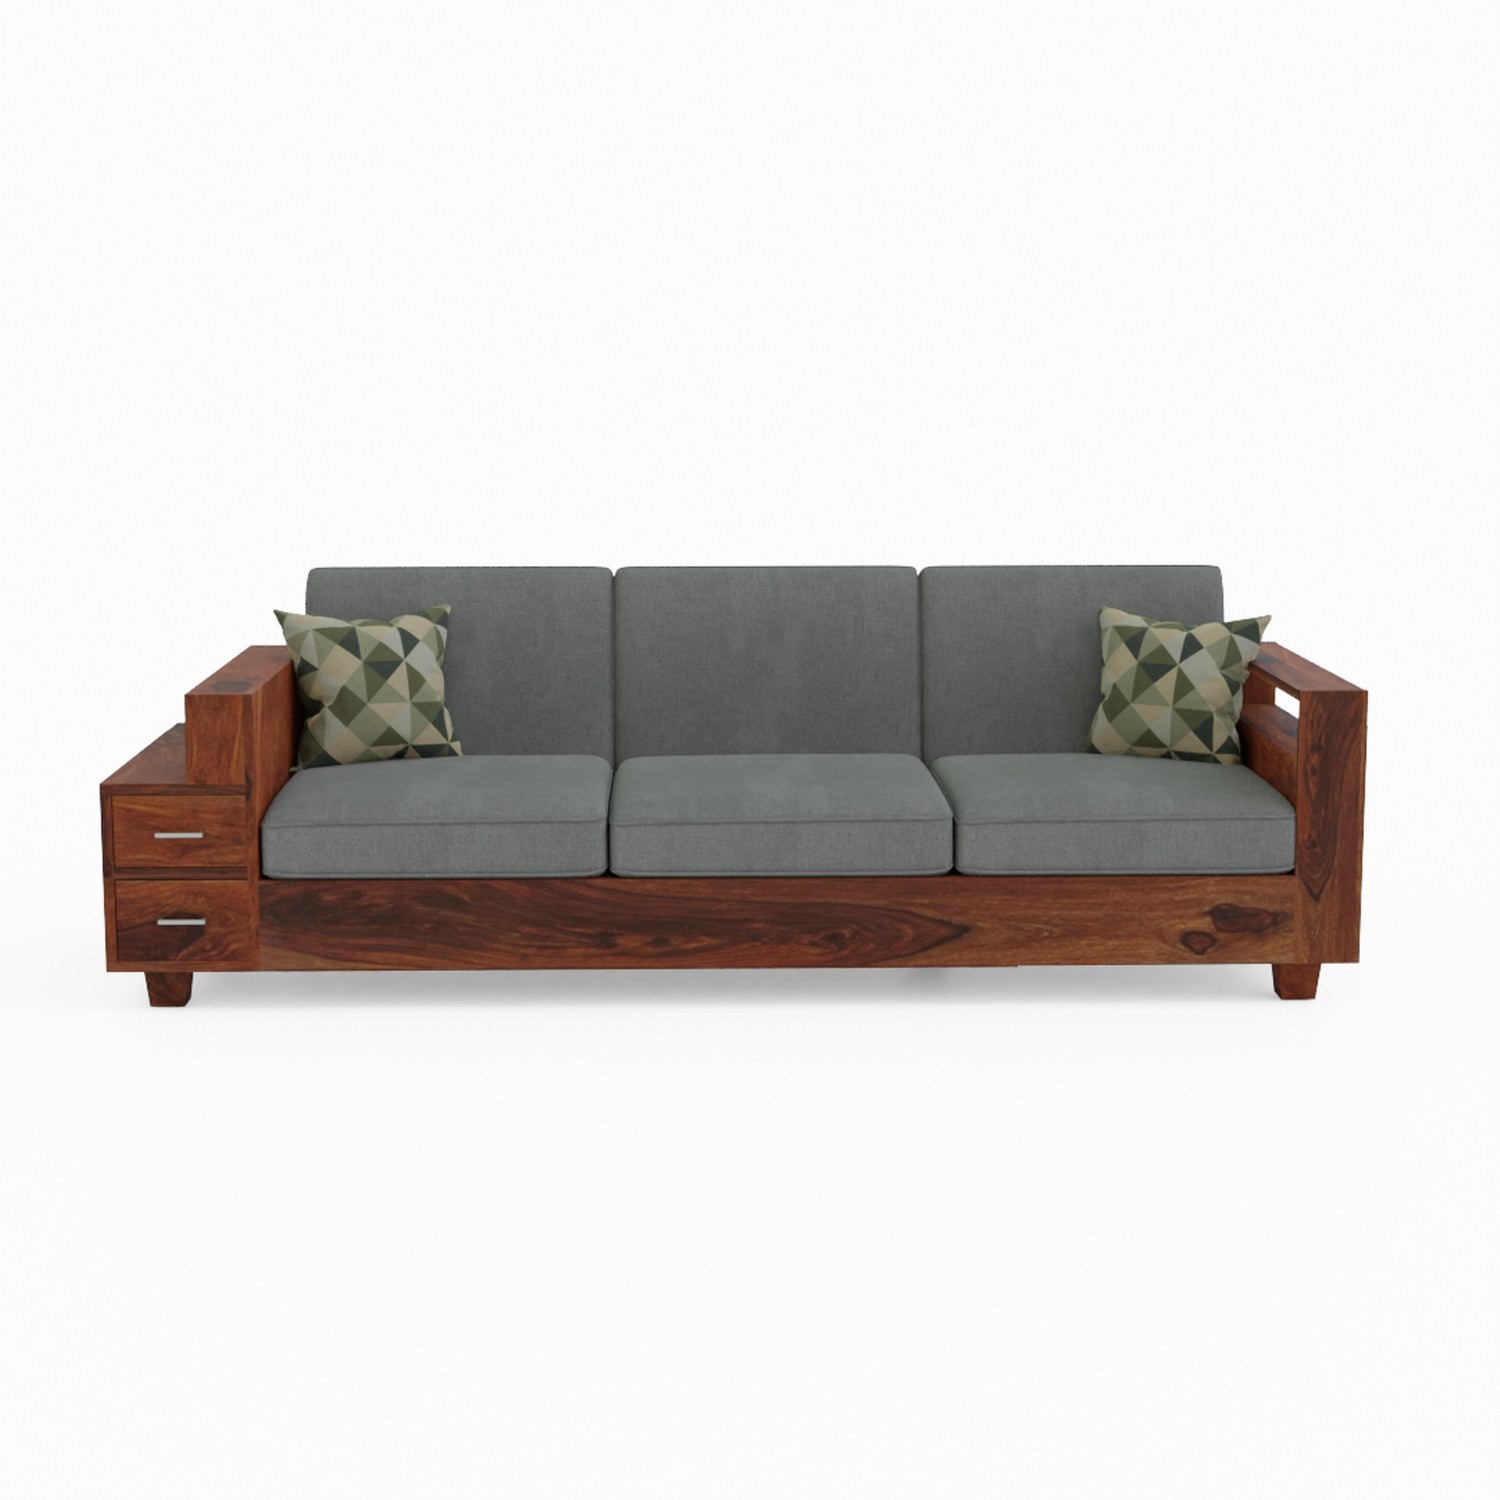 Woodora Solid Sheesham Wood 5 Seater Sofa Set With Coffee Table (3+1+1, Natural Finish)